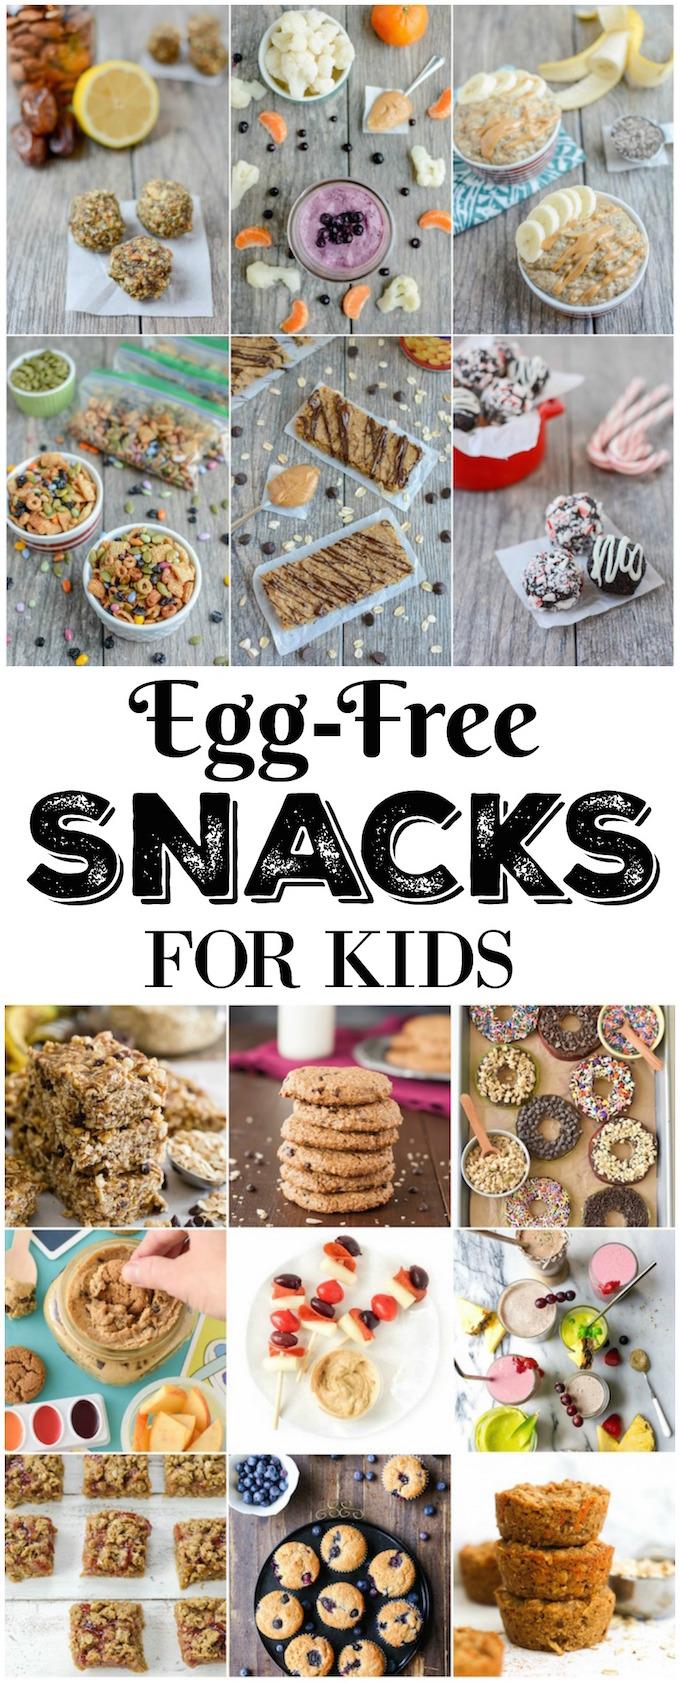 These Egg-Free Snacks for kids can be enjoyed by children with an egg allergy and those without. They also make a healthy snack for adults!